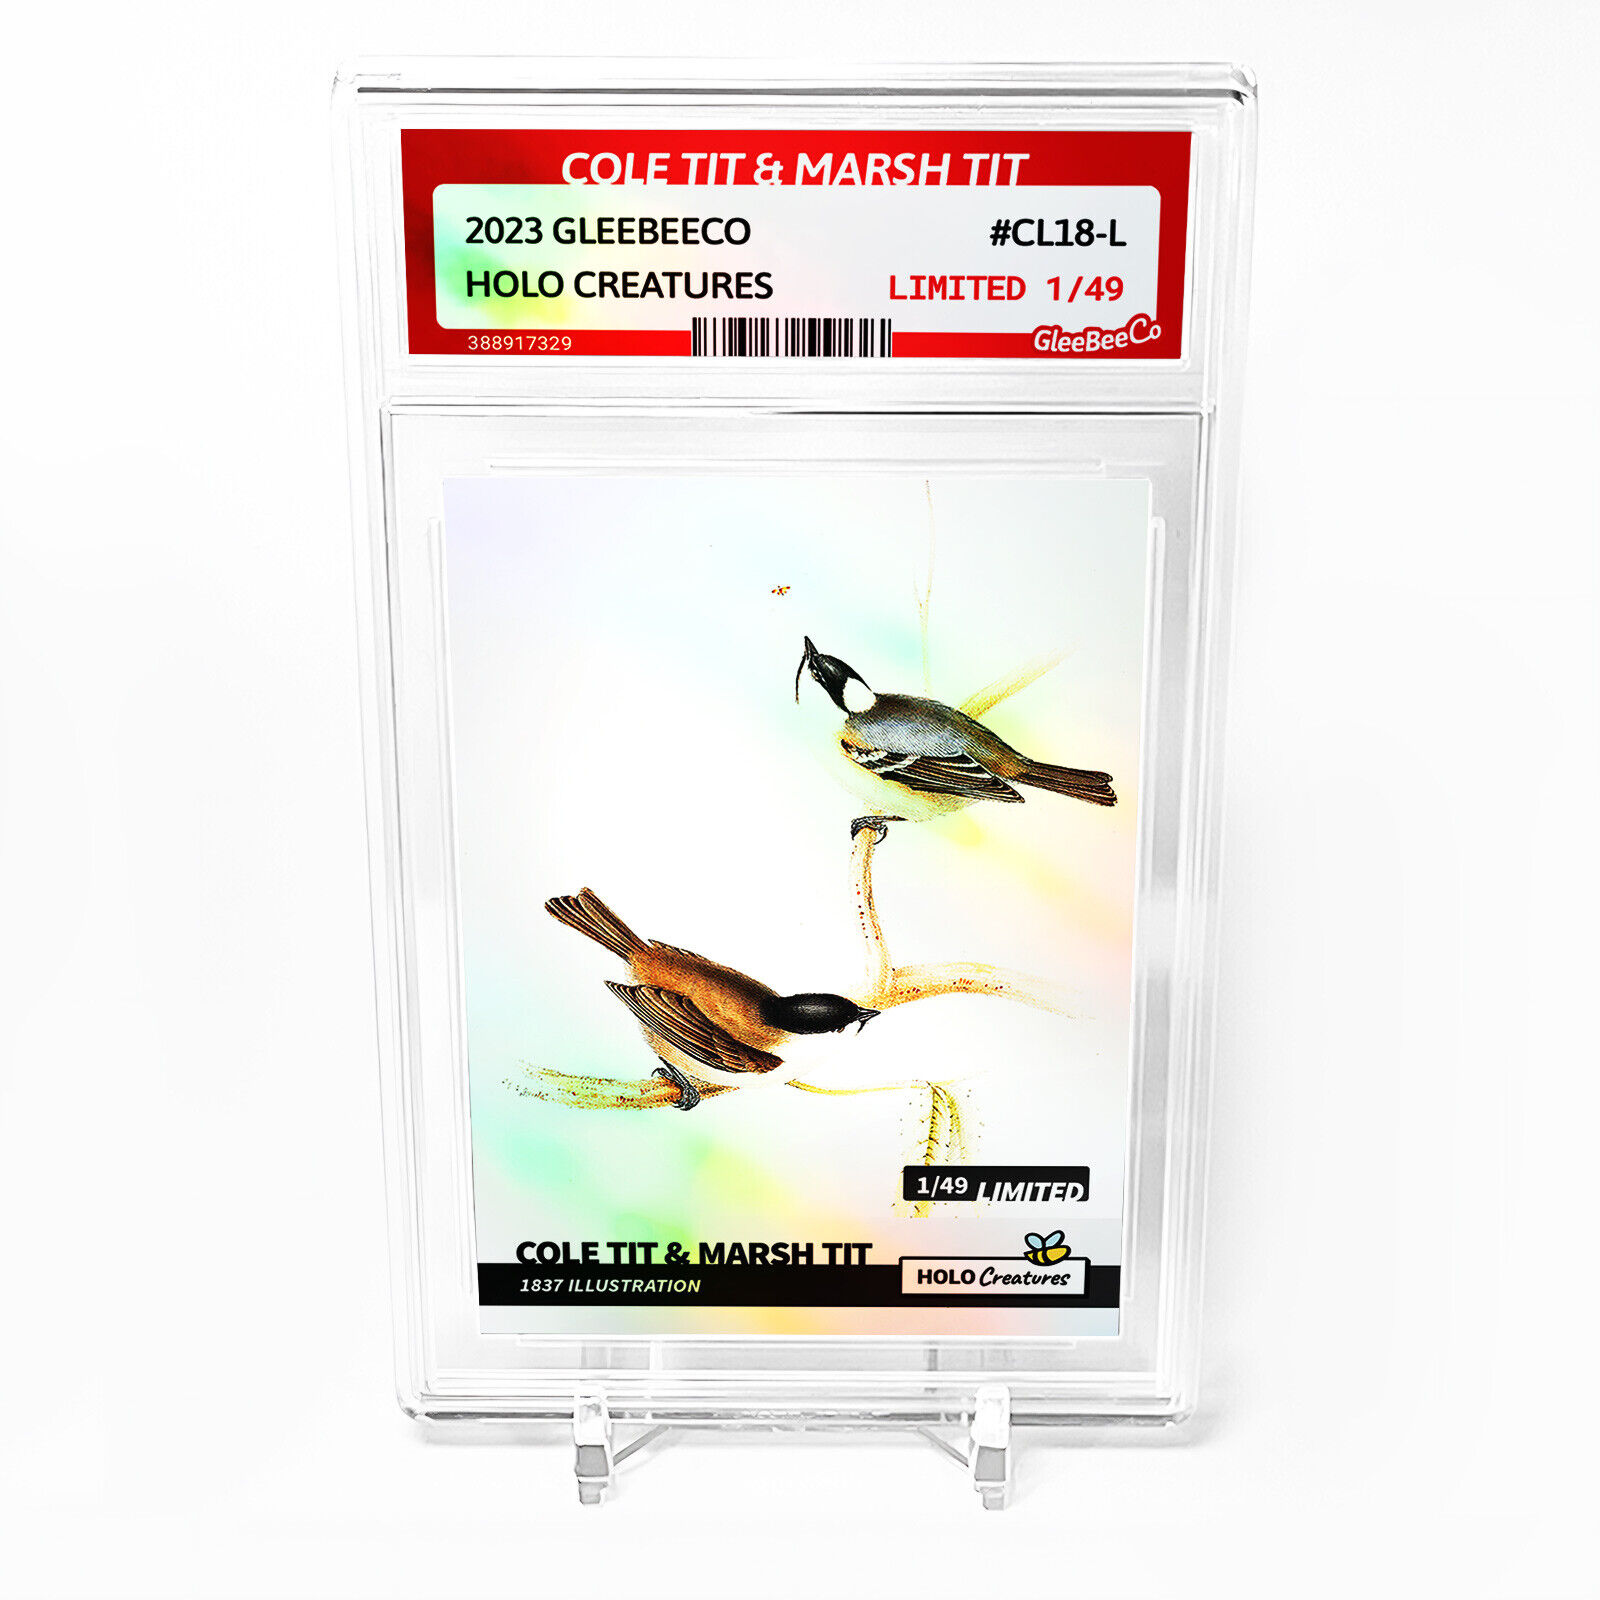 COLE TIT & MARSH TIT Card 2023 GleeBeeCo Holo Creatures #CL18-L /49